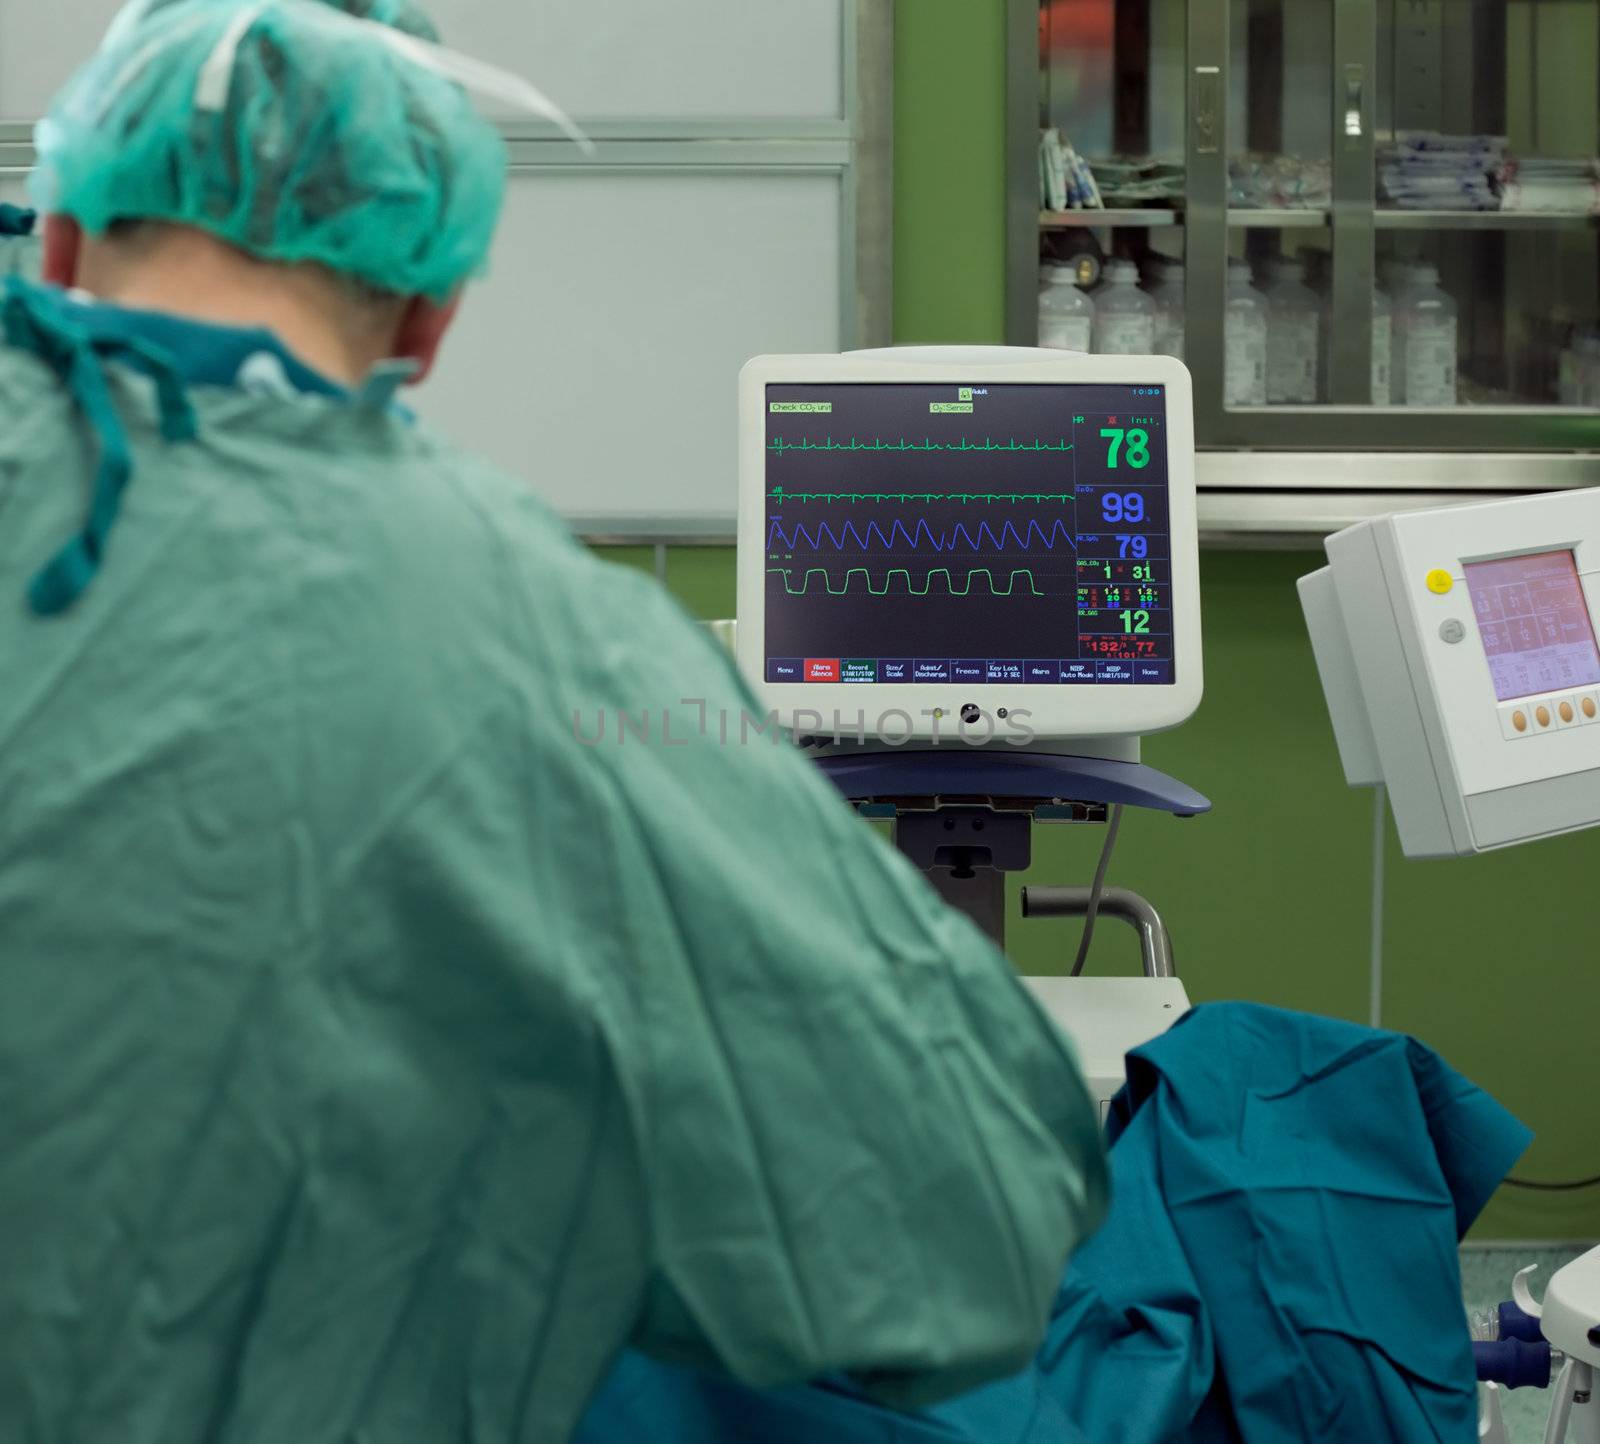 cardiogram monitor in surgery while doctor operates on patient